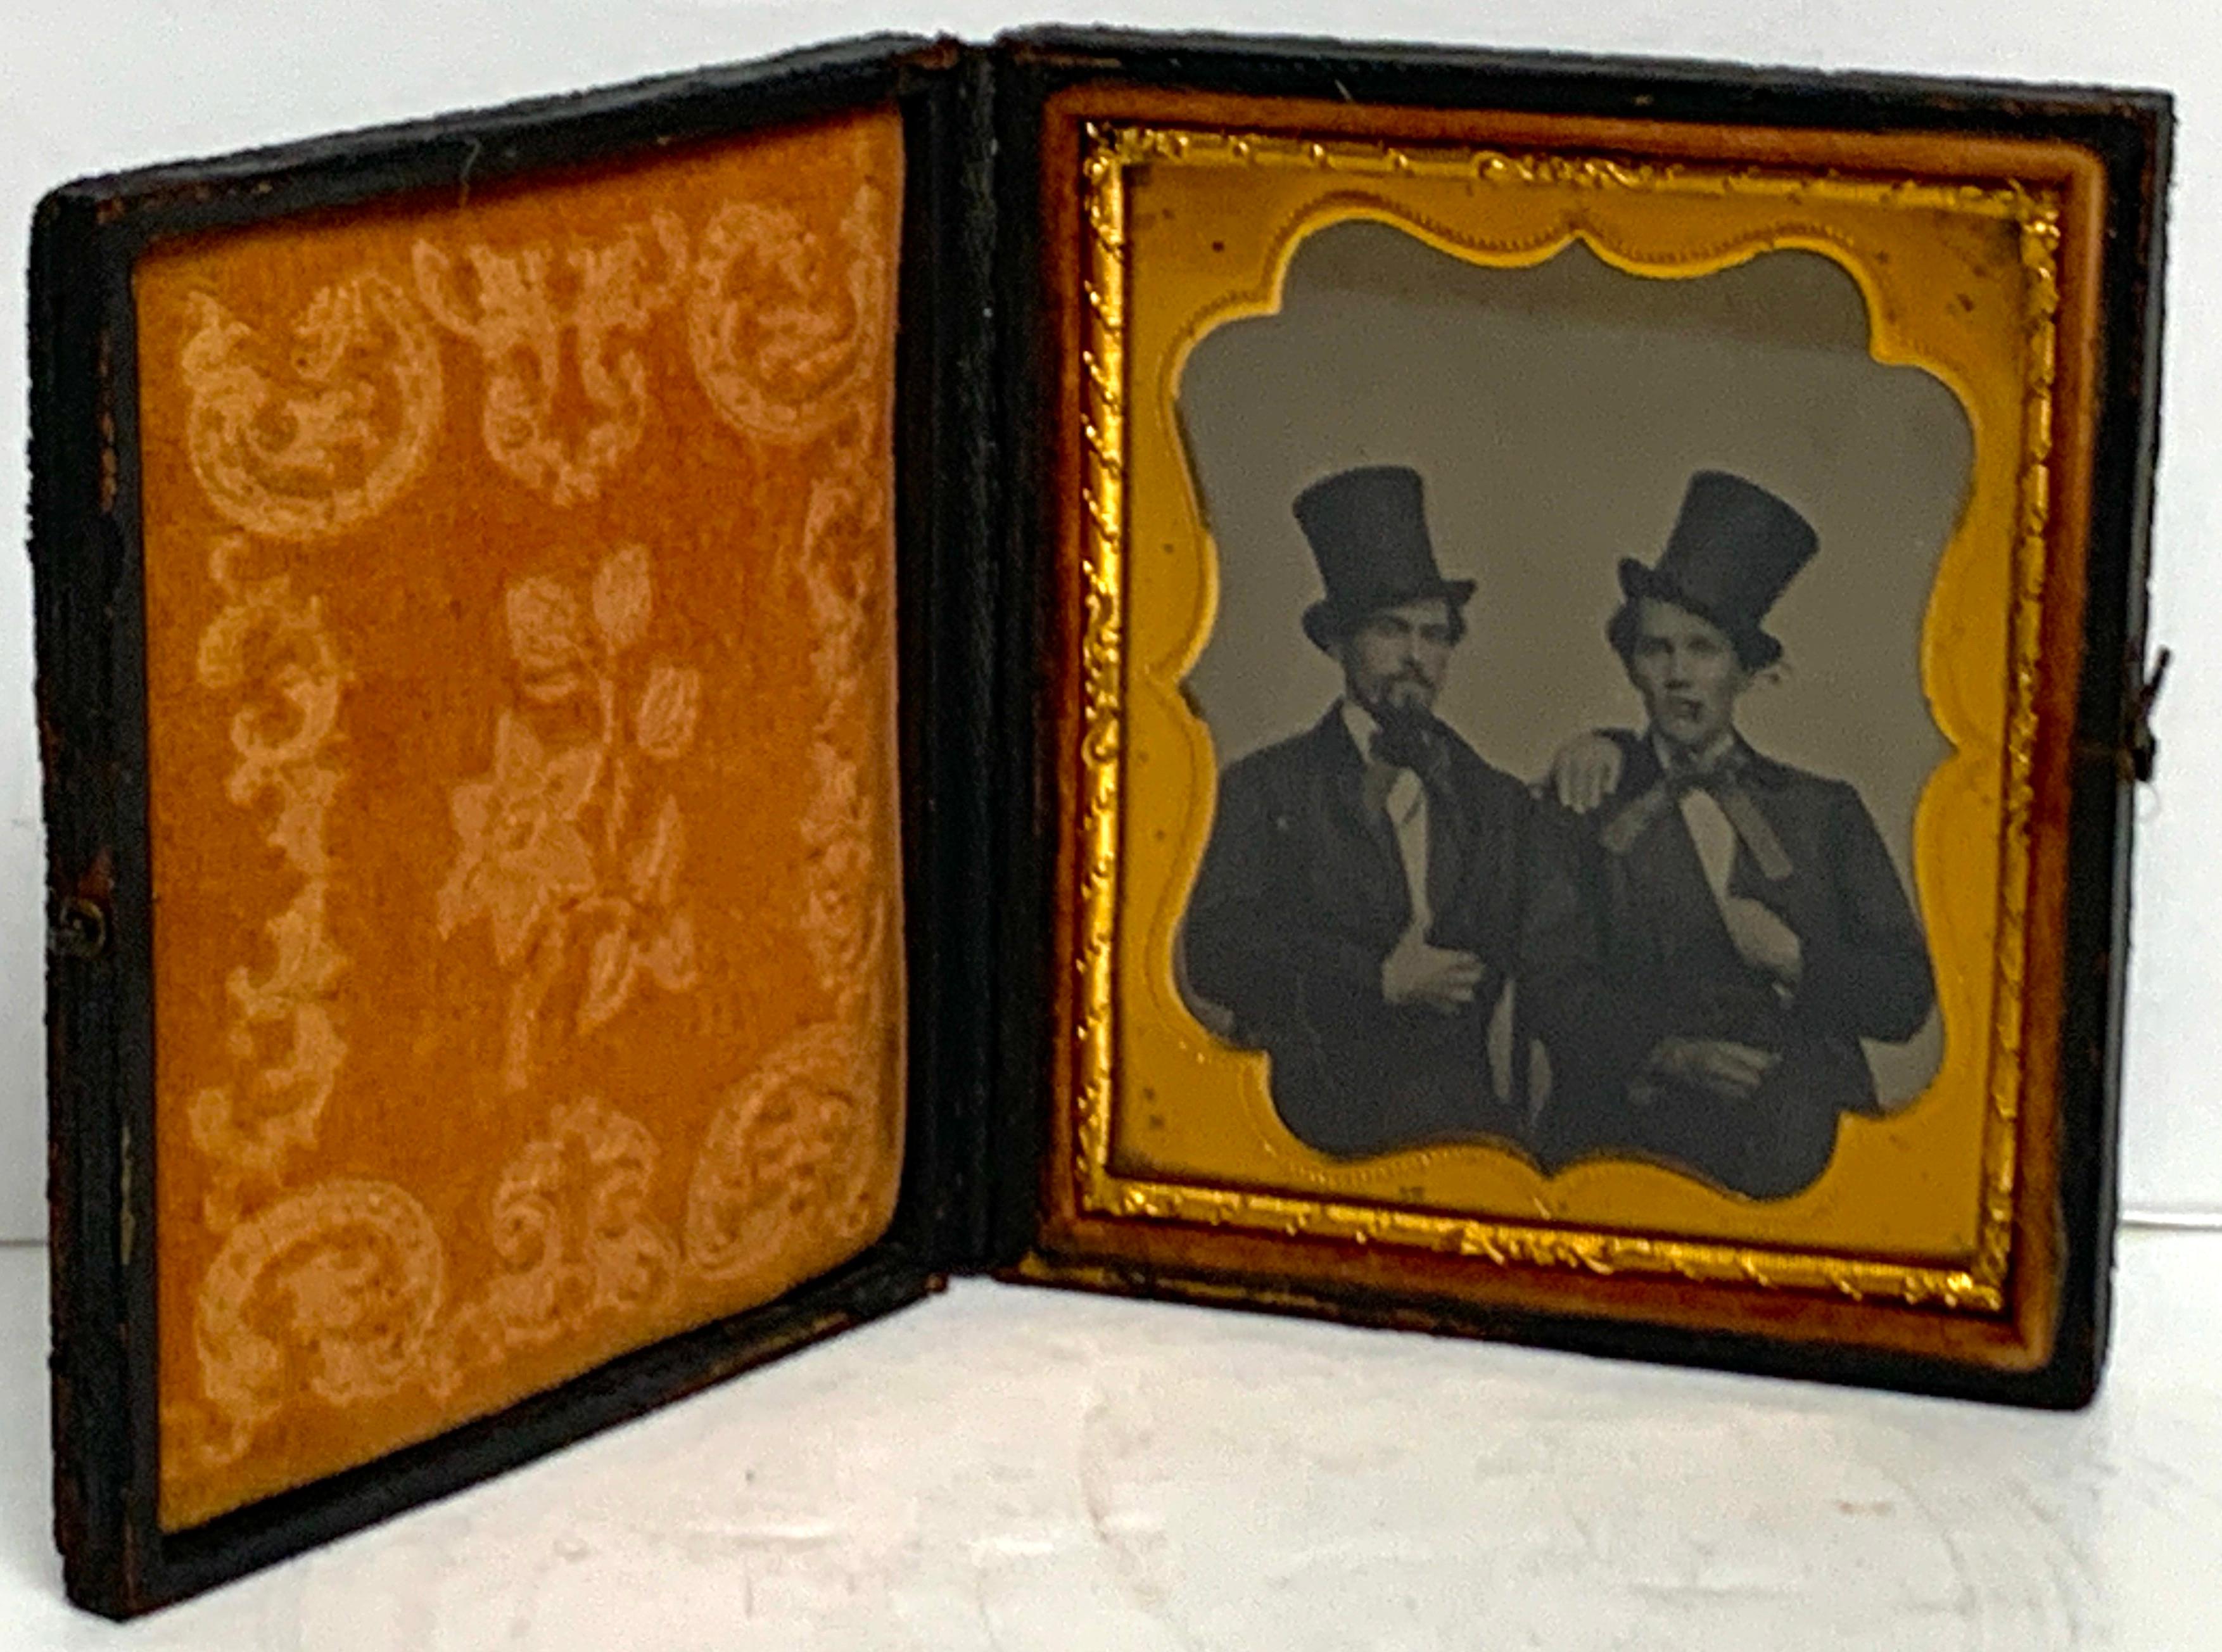 Sixth plate Daguerreotype Portrait of two seated cigar smoking, embracing young men wearing top hats, Western bow ties and , in original pressed-paper/leather case. 
Measures: Case 3.25